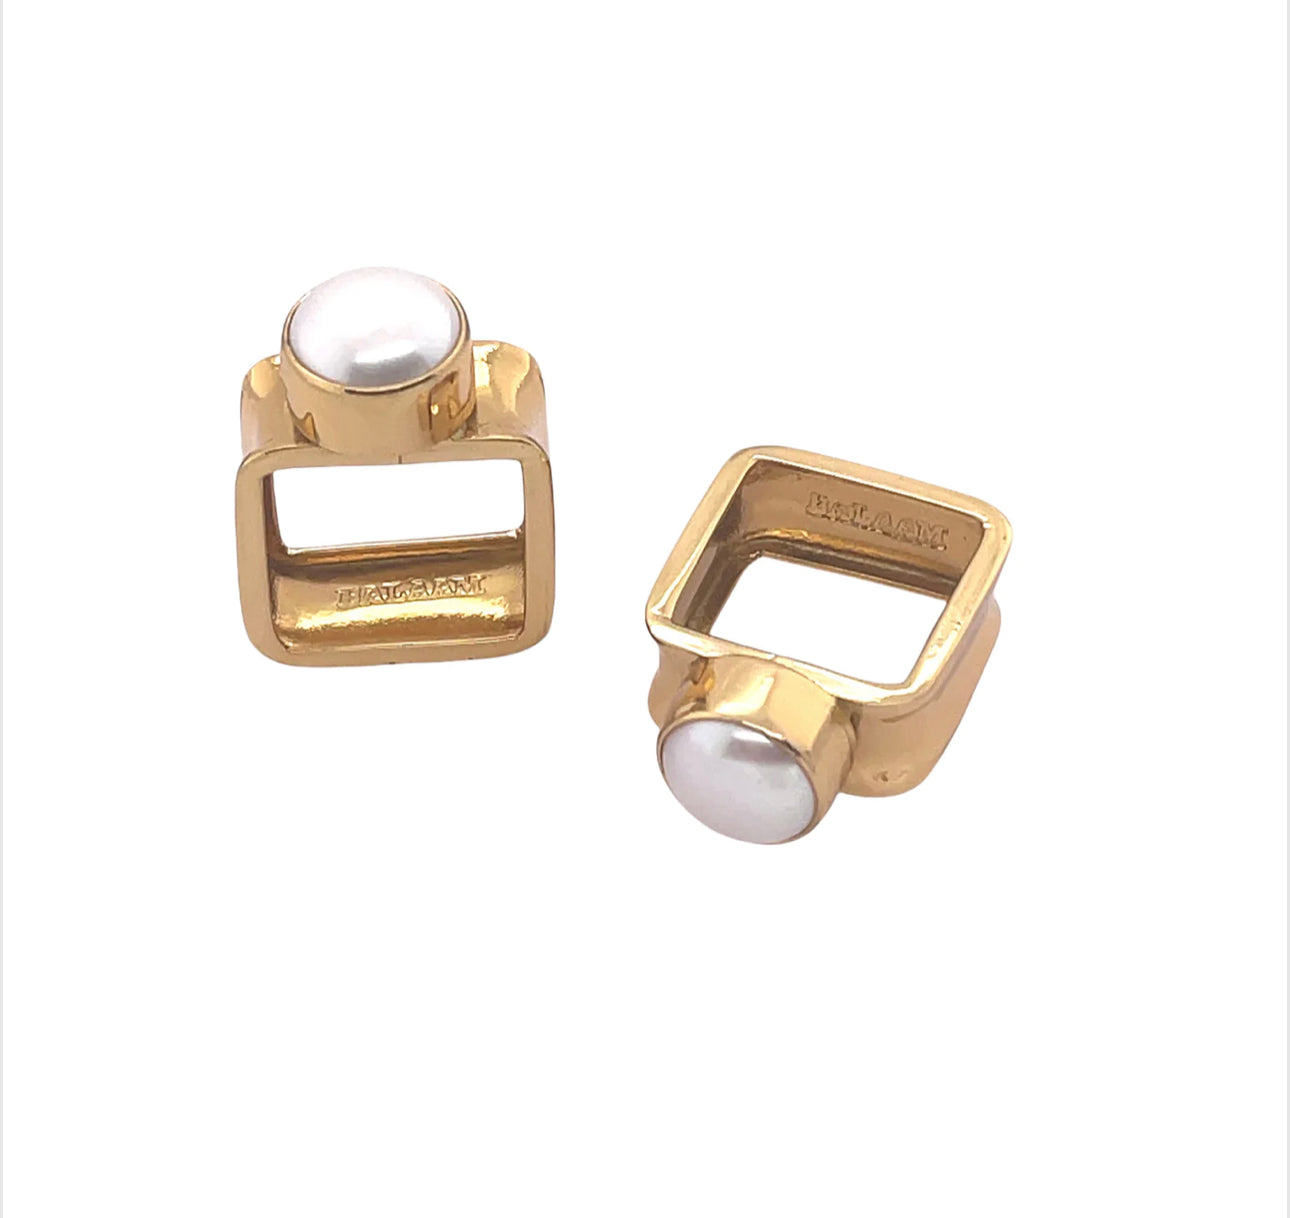 2 gold plated square rings at different angles